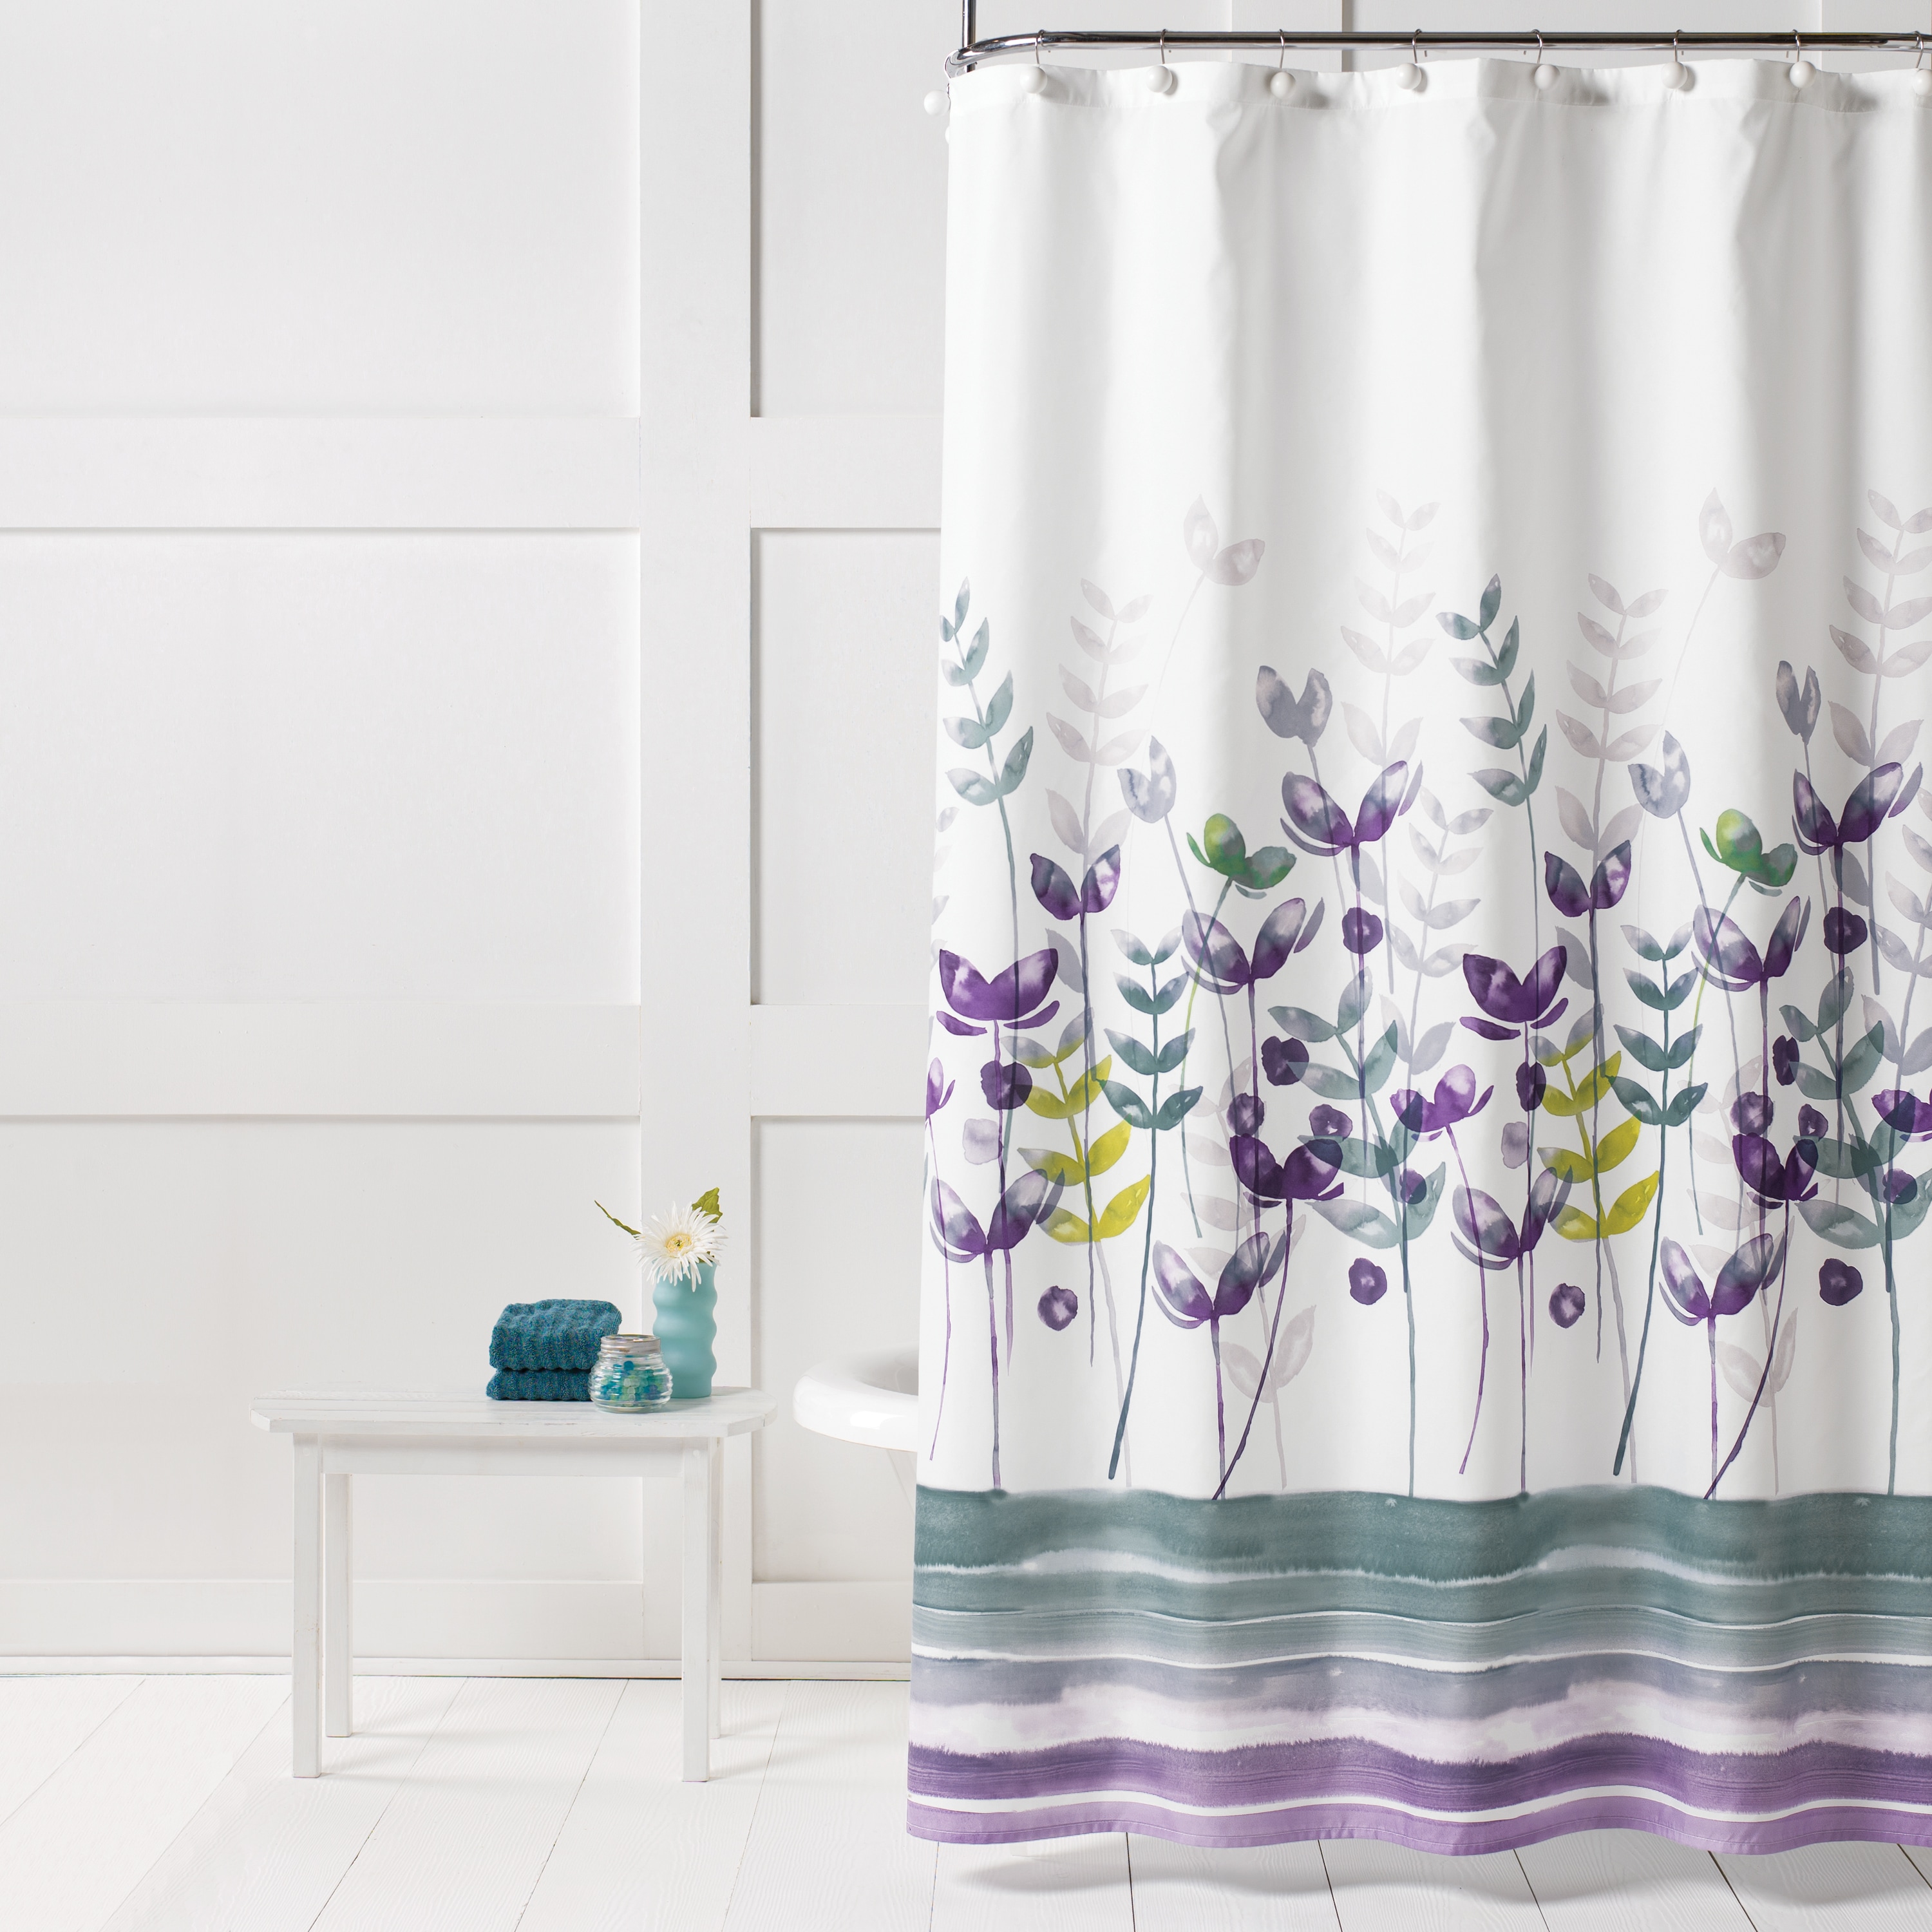 Watercolor Floral Bathroom Curtain Teal and White Shower Curtains 72×72 inches Neasow Blue and Grey Shower Curtain 